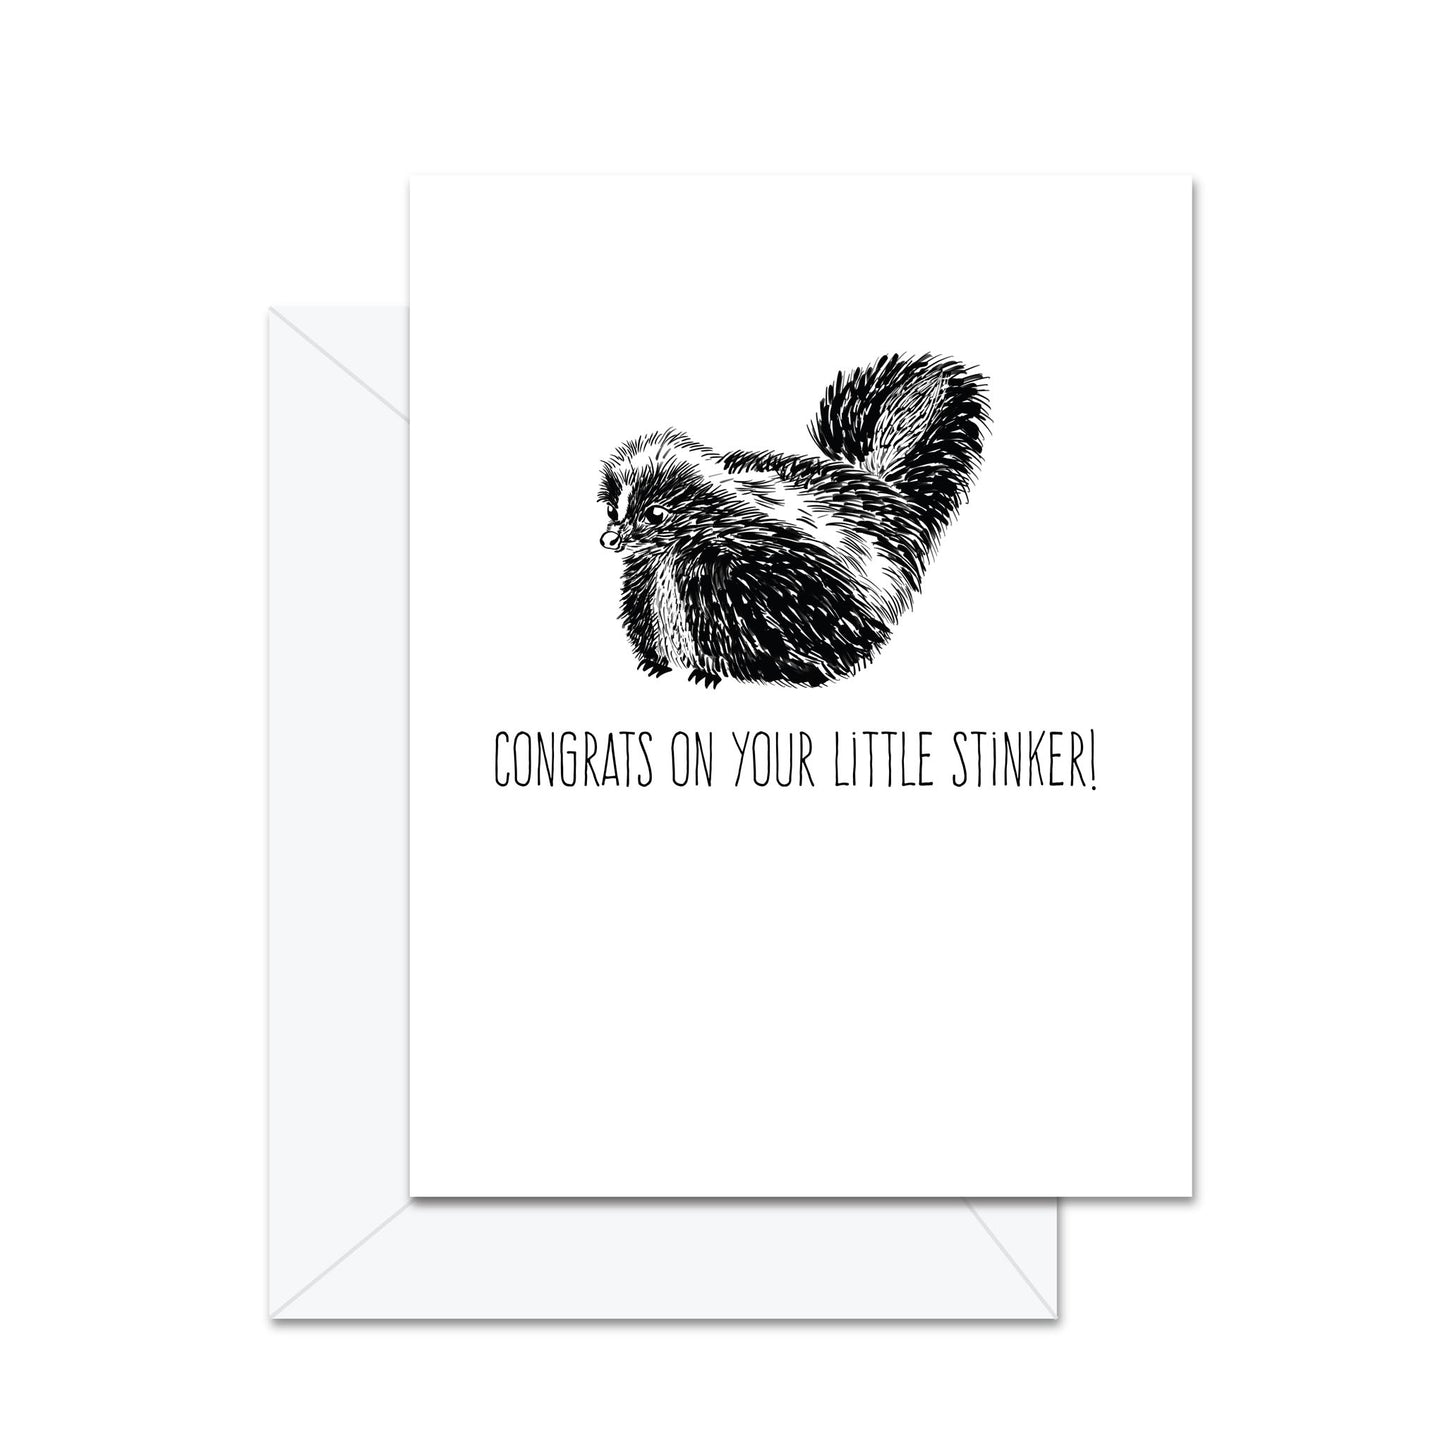 Congrats On Your Little Stinker! - Greeting Card